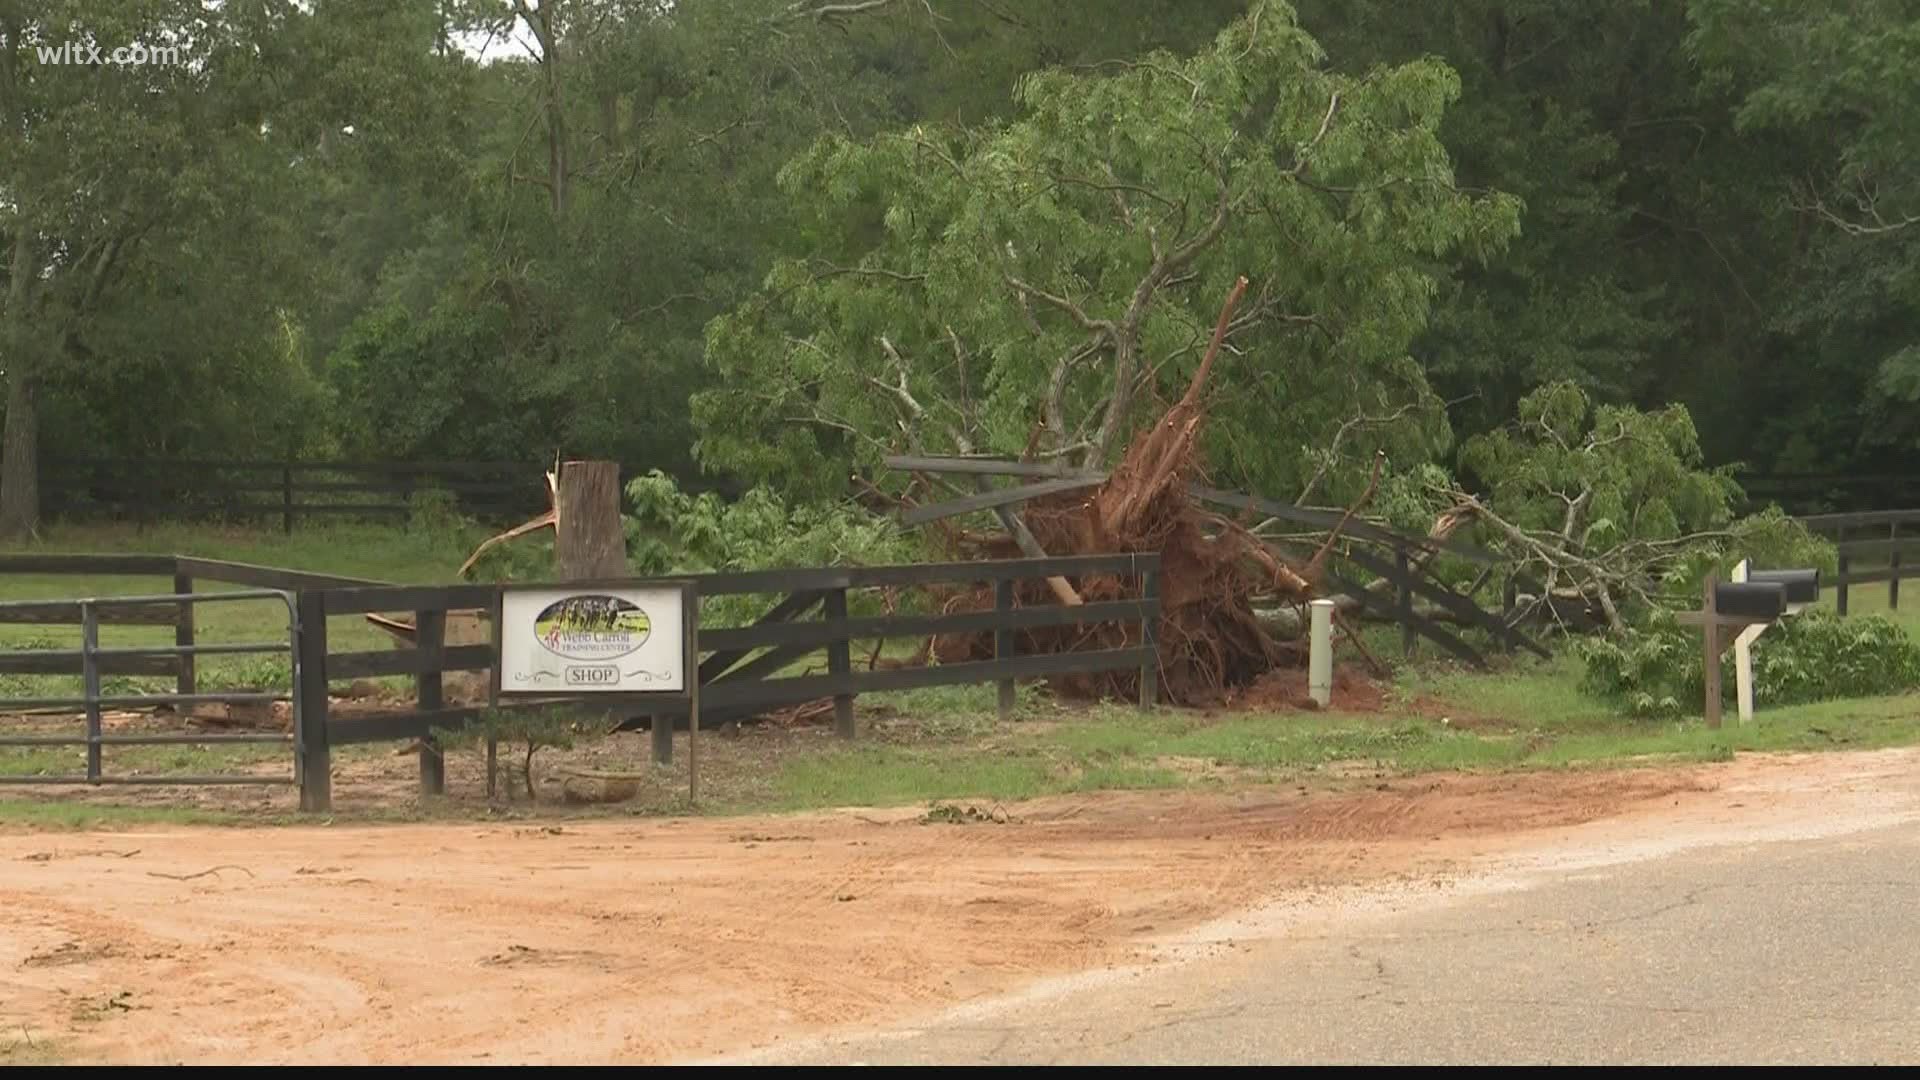 A weak tornado spawned by the remnants of Sally caused some damage in Calhoun County, SC on September 18.